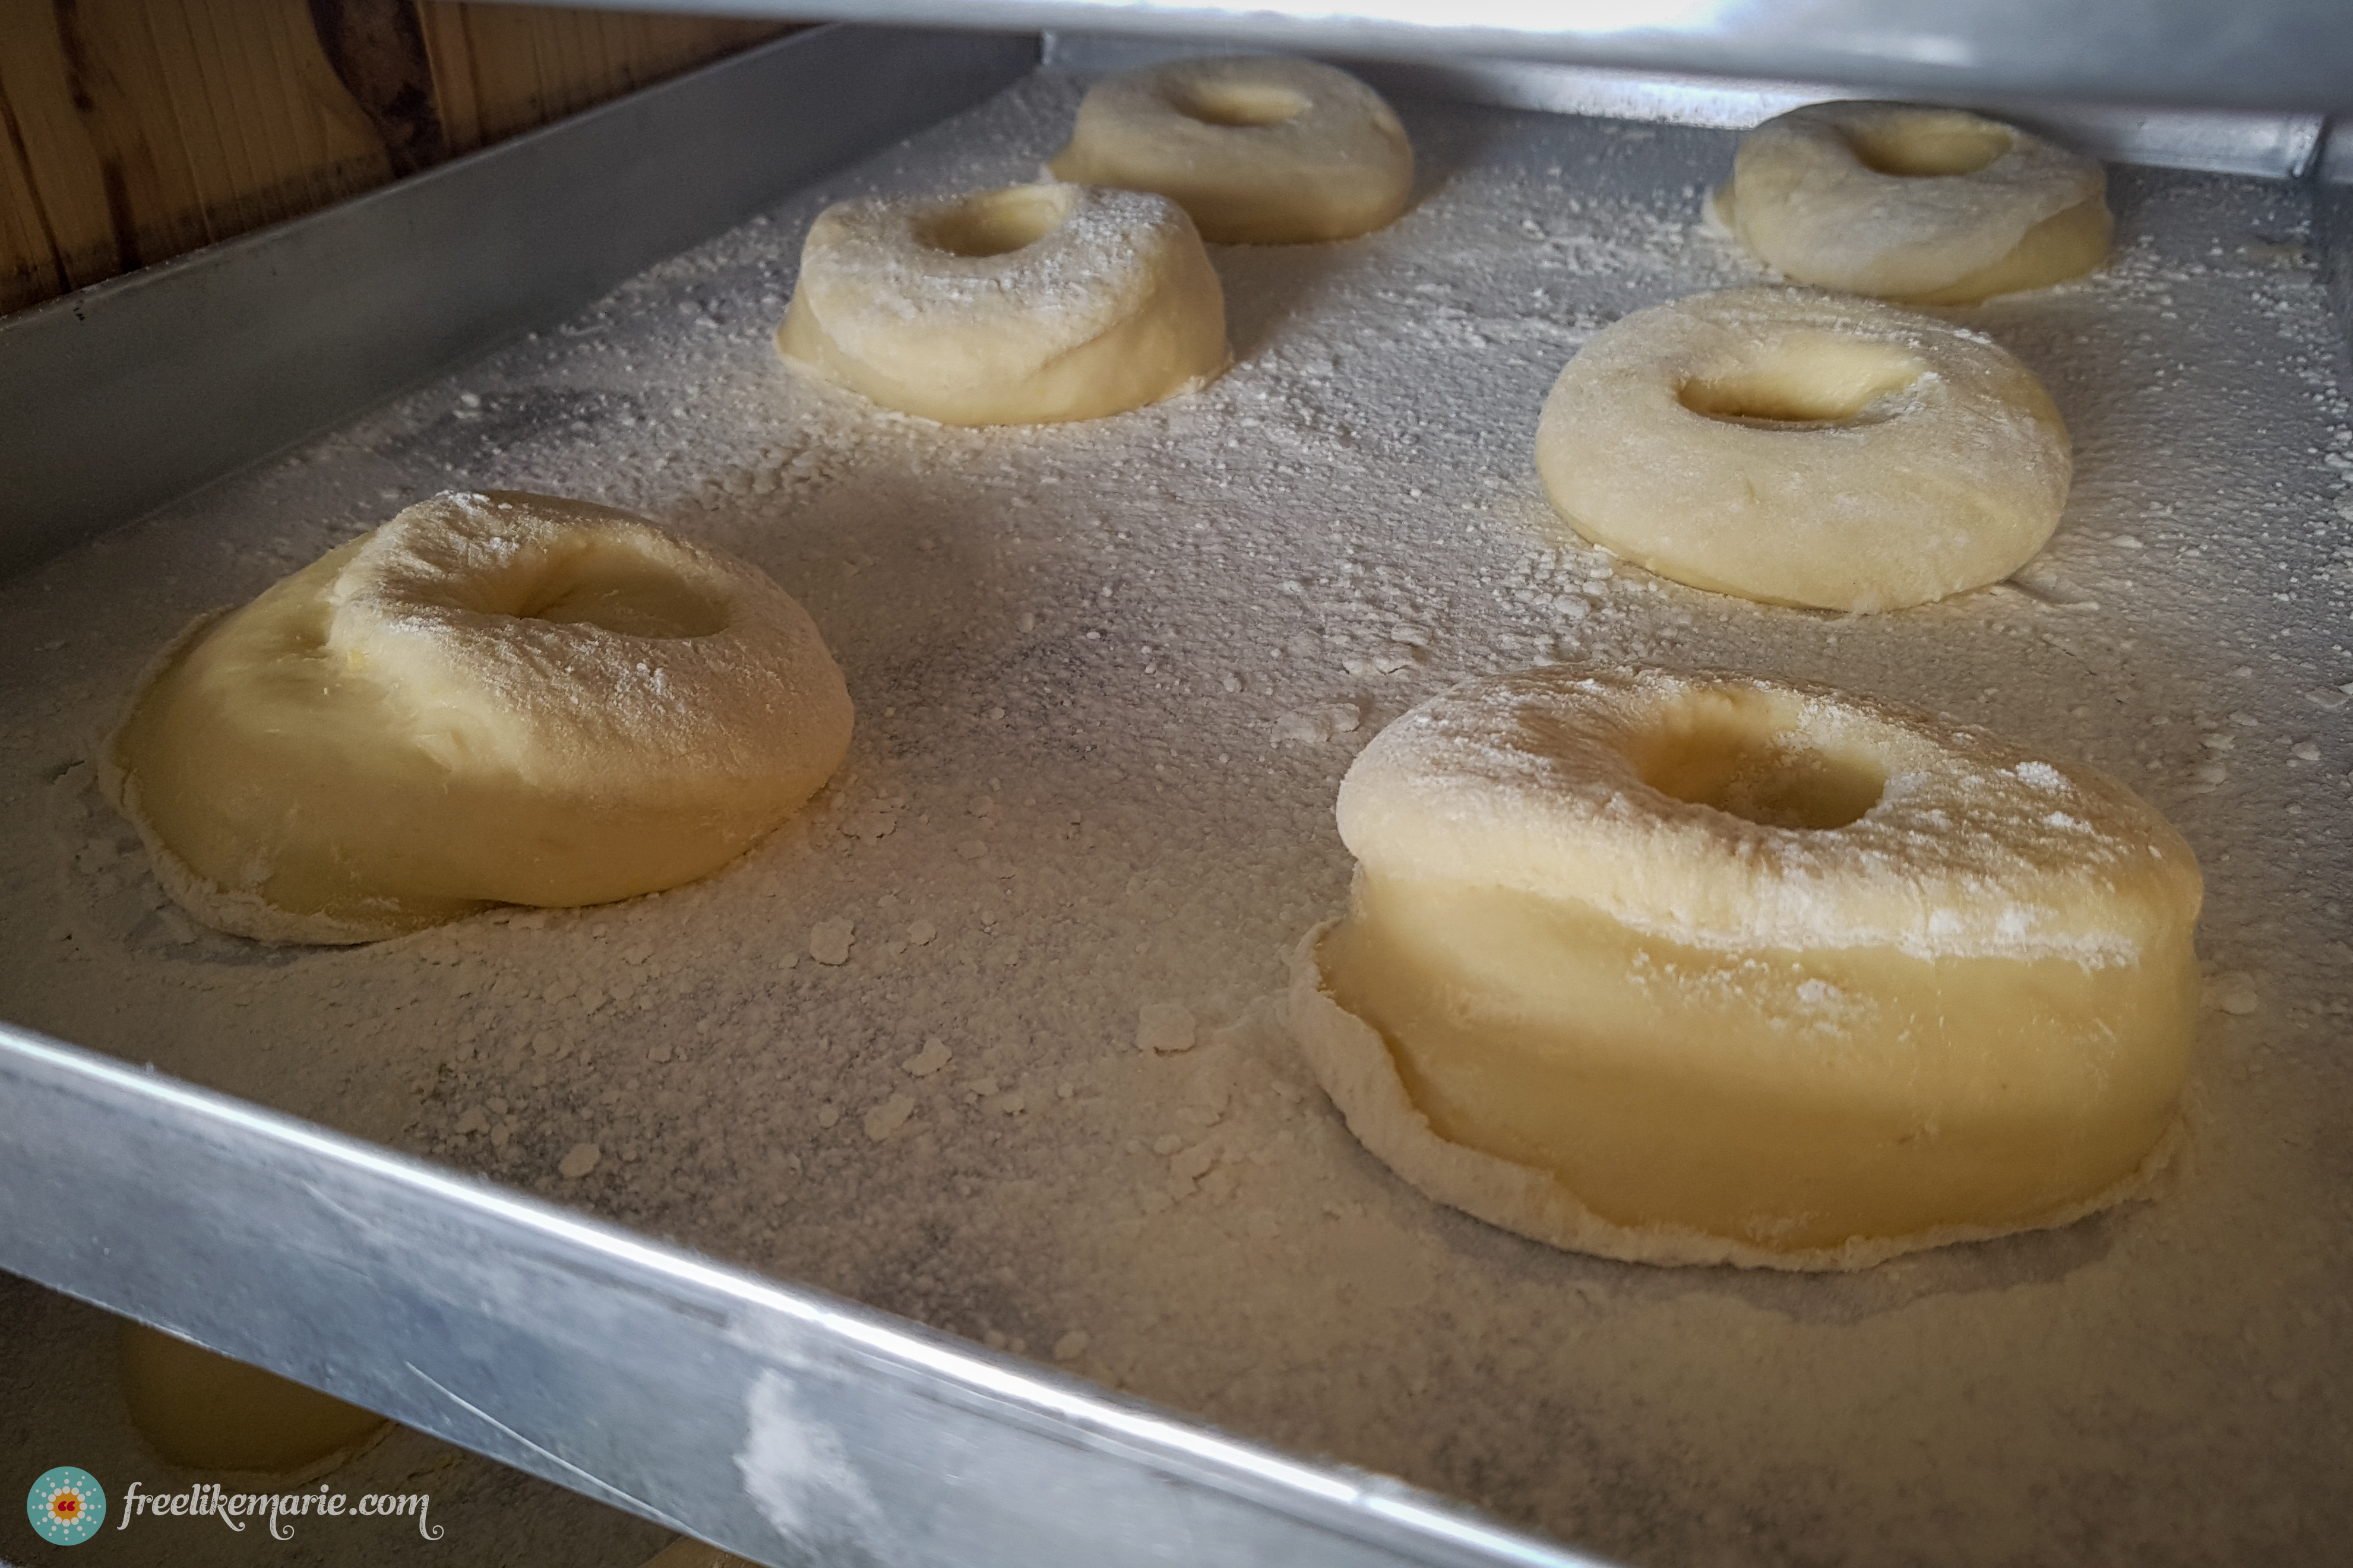 Donuts in the baking